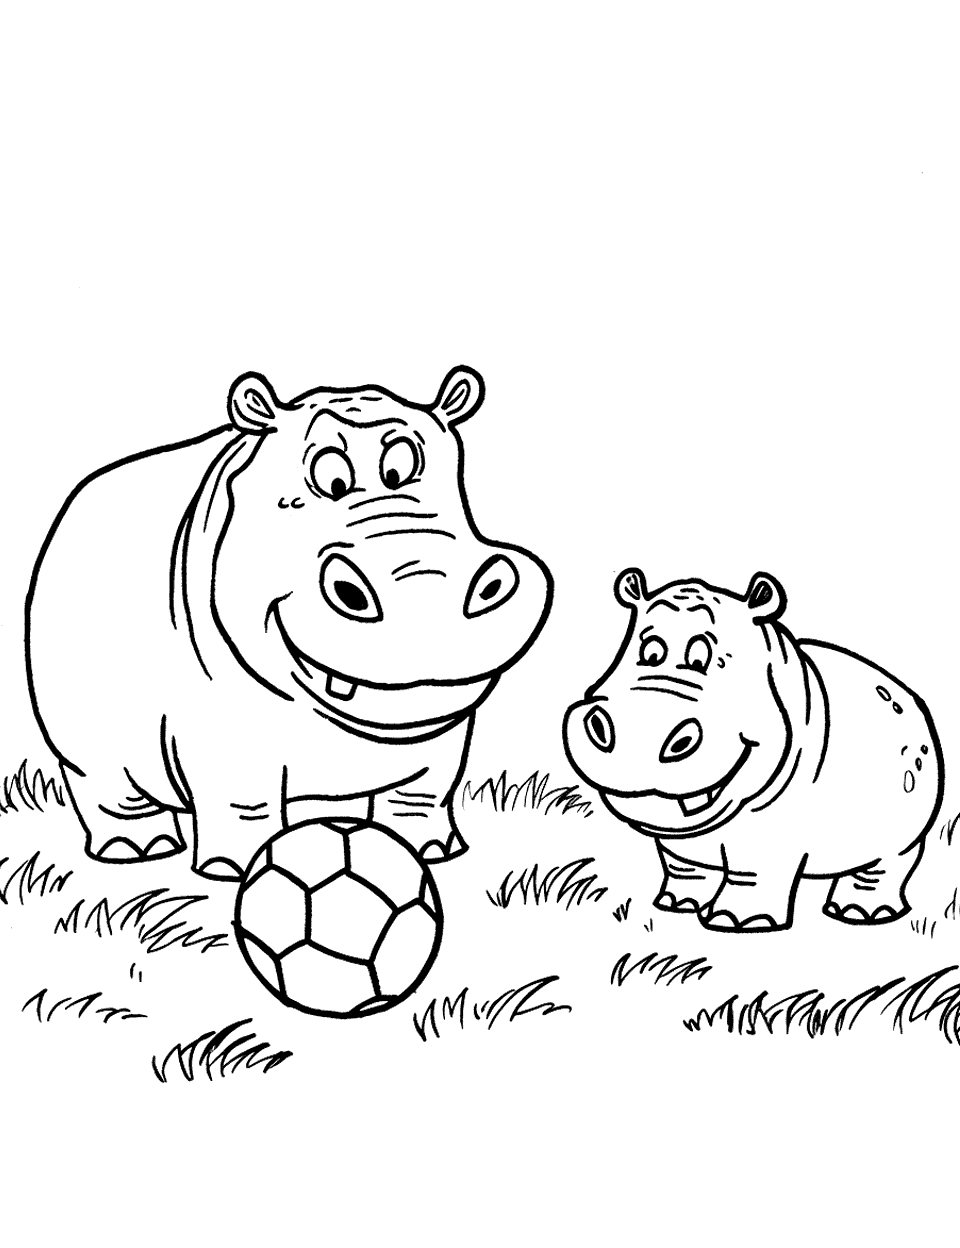 Hippo Soccer Match Coloring Page - Hippos playing a friendly game of soccer in a field.